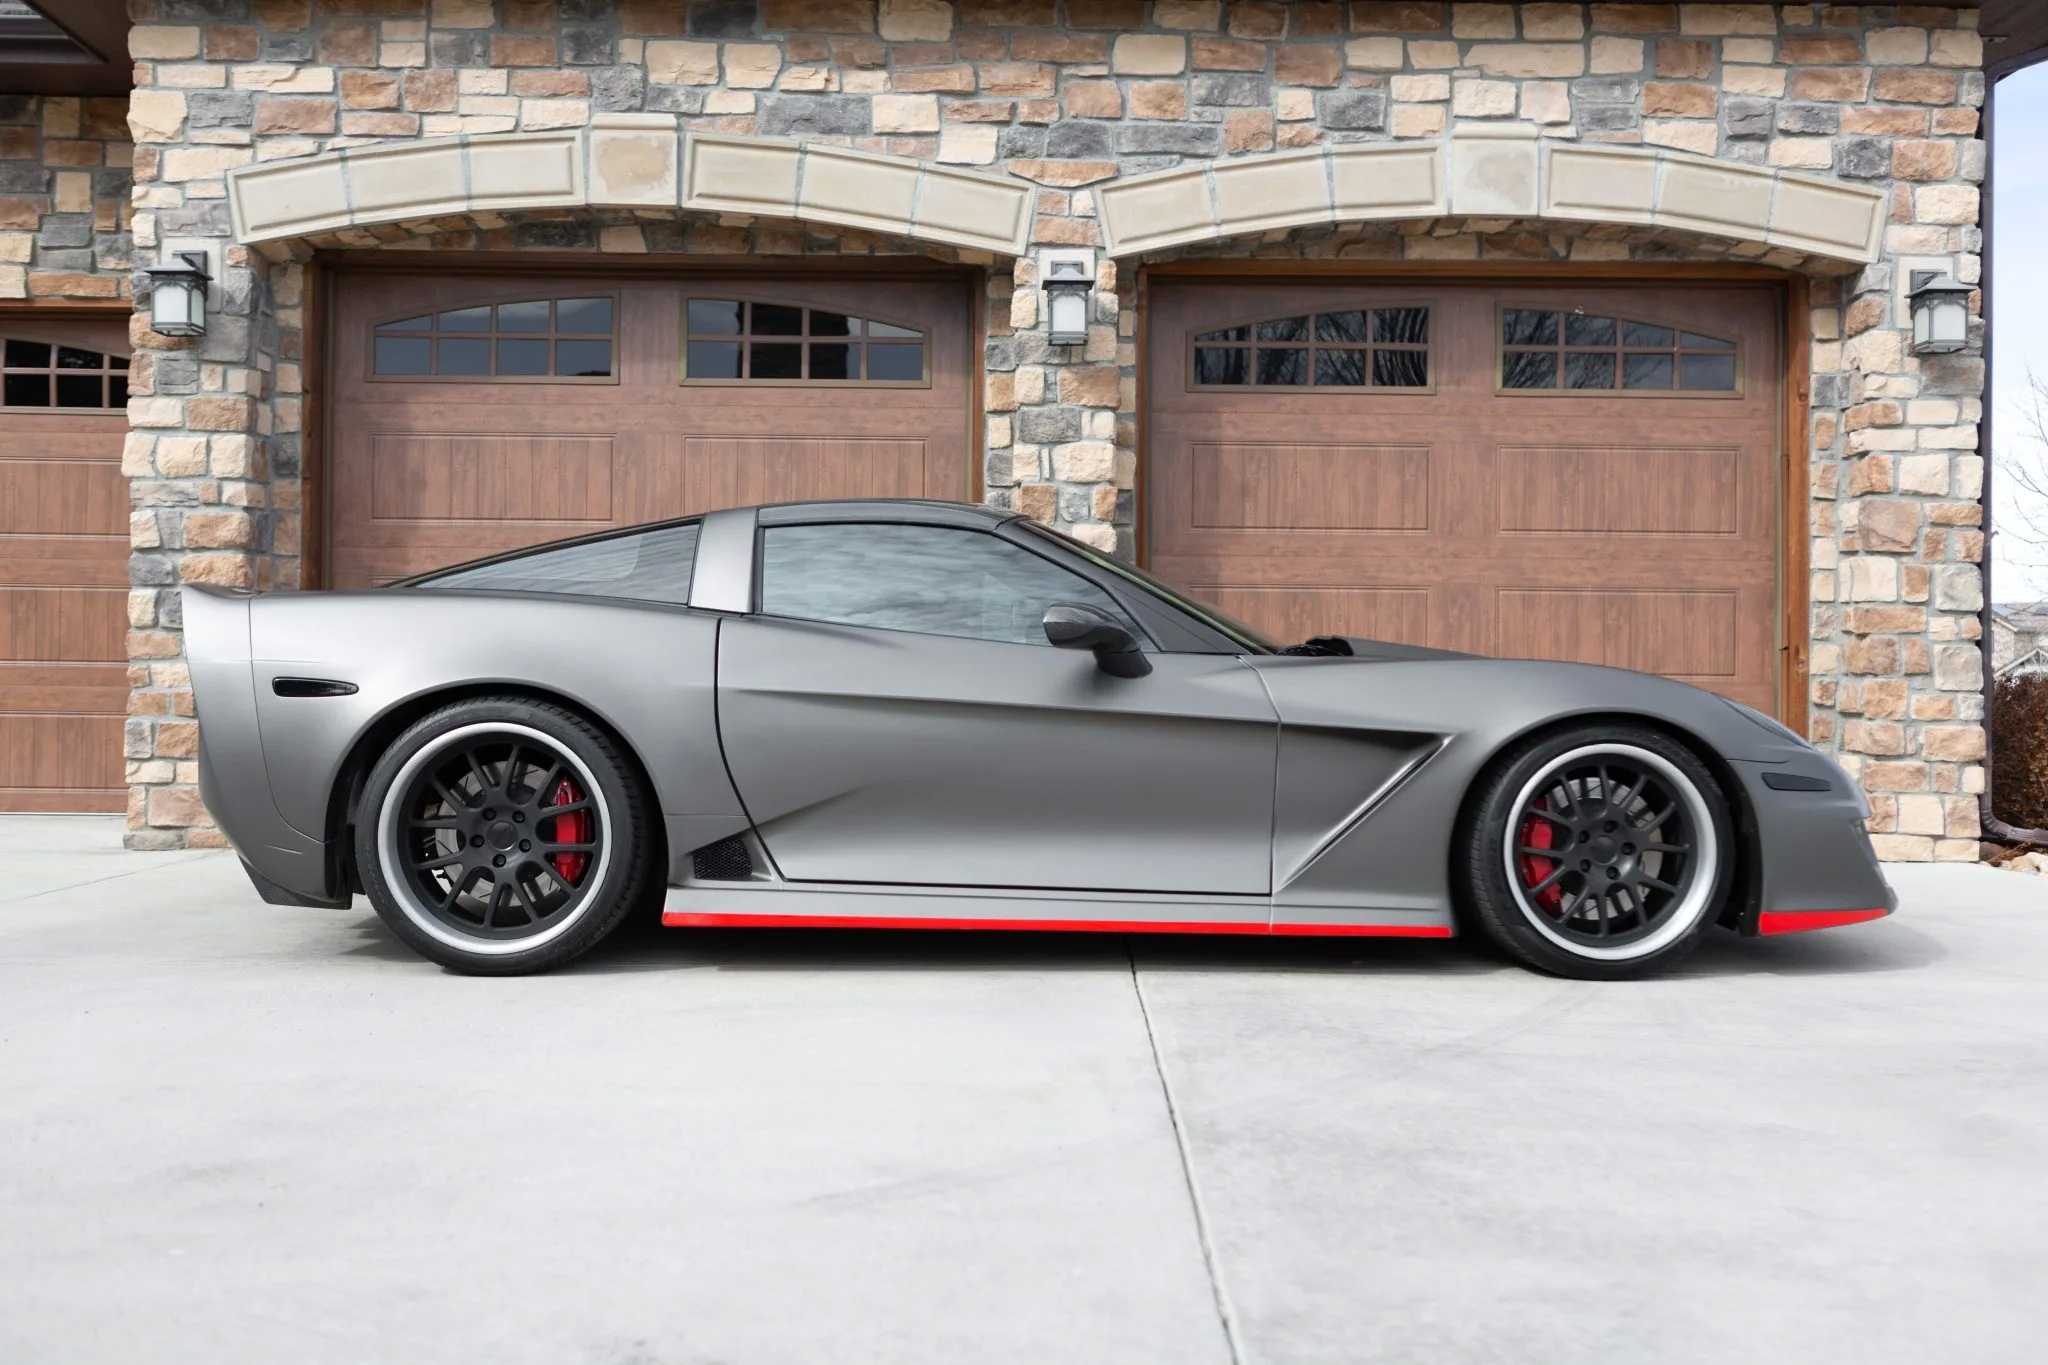 What Would You Pay For This Specter Werkessports 2008 Corvette Gtr